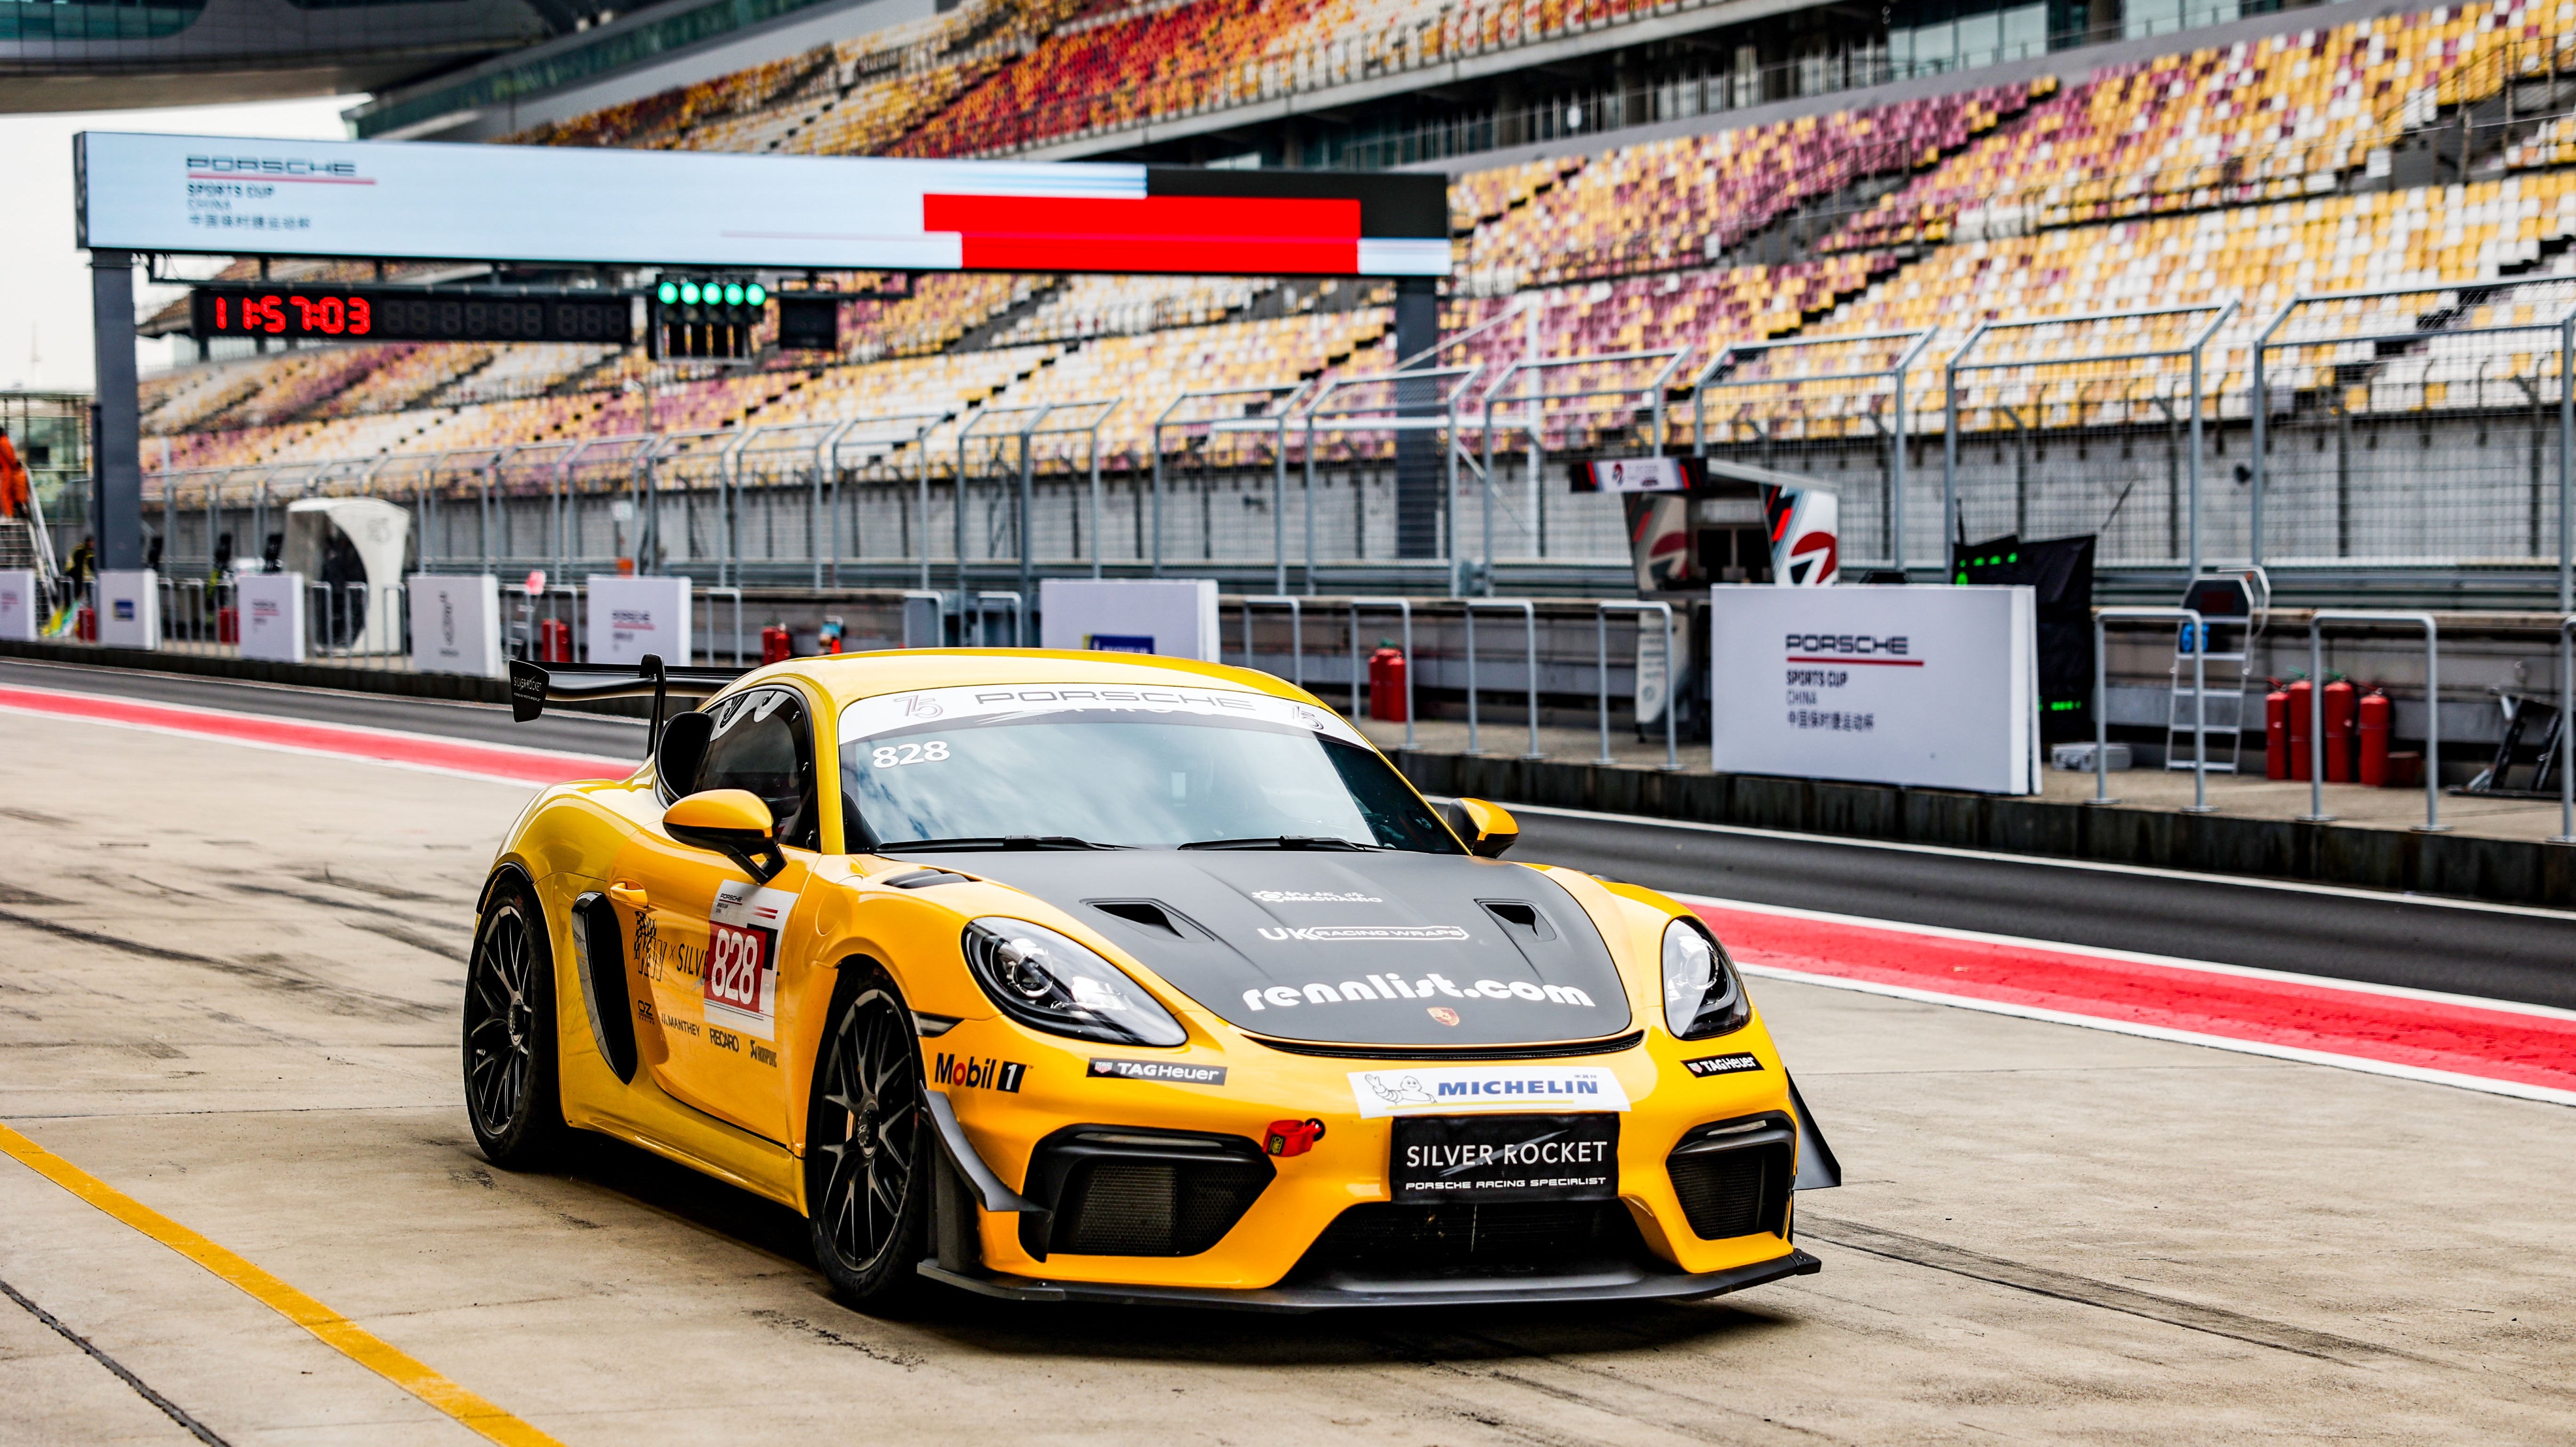 NEW RECORD! Fastest Porsche GT4 Lap Time Record Achieved - SilverRocket GT4 RS at Shanghai International Circuit